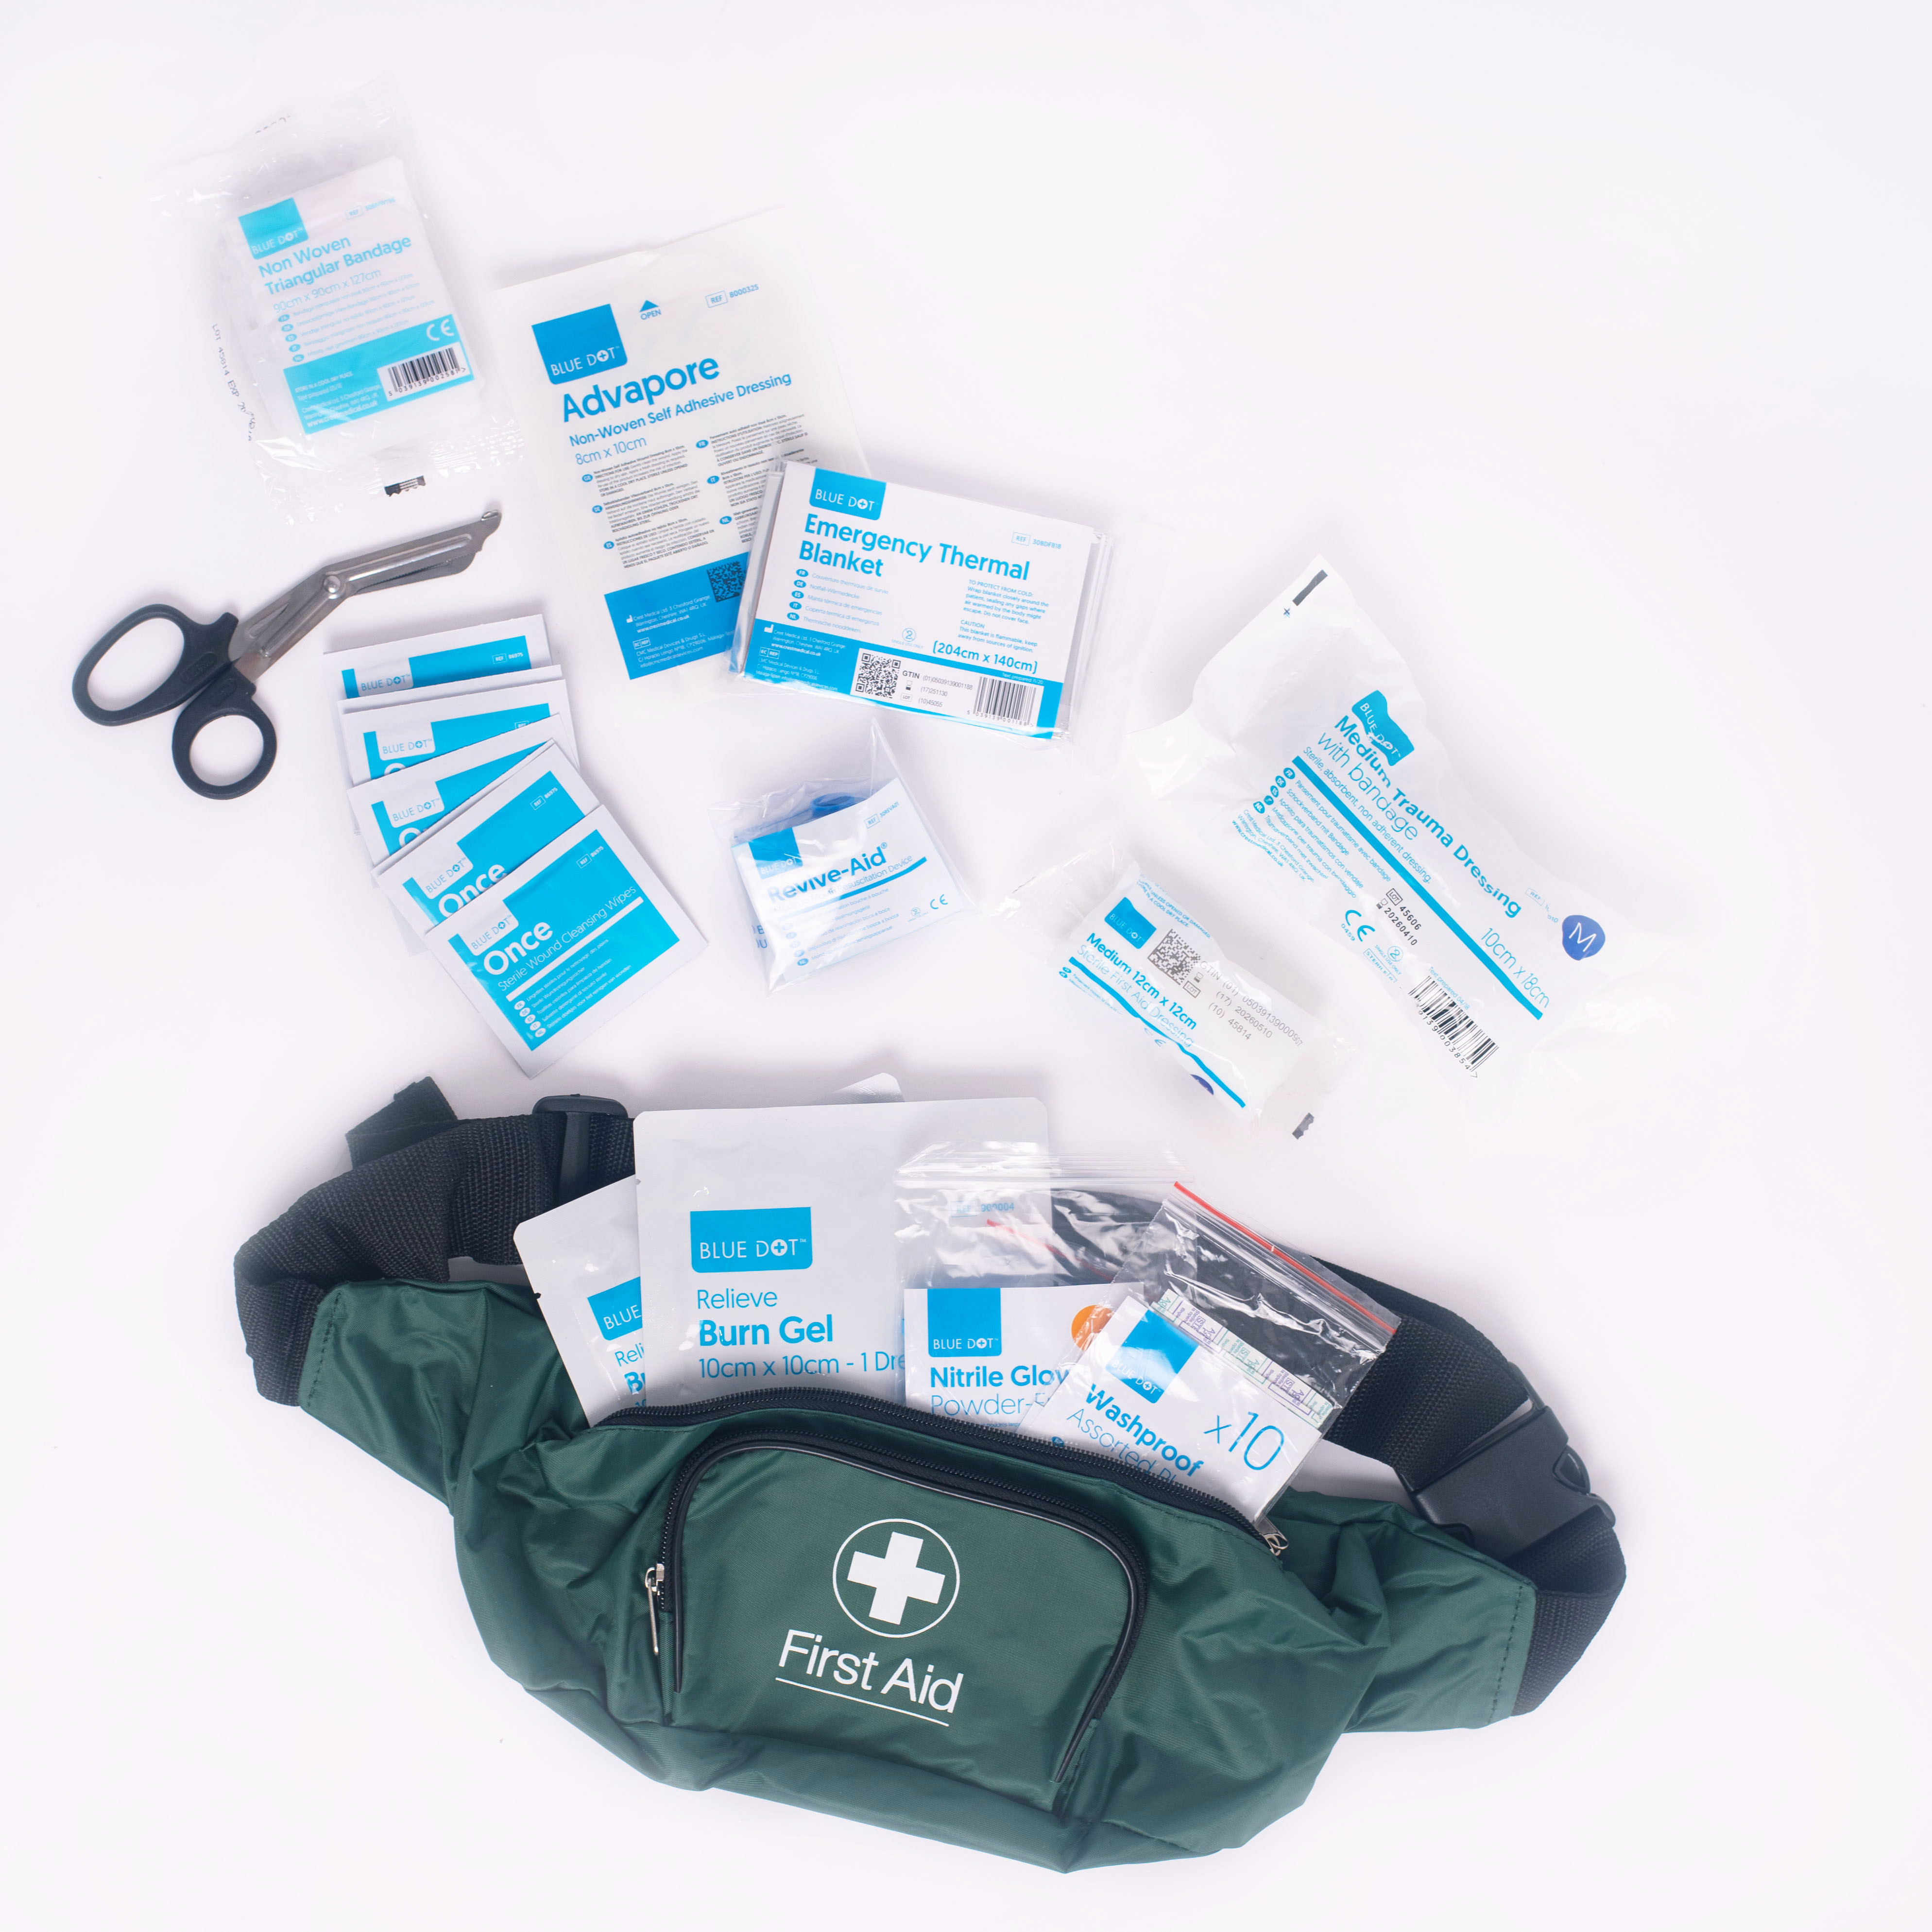 Blue Dot BS 8599-1 Travel First Aid Kit in Bum Bag